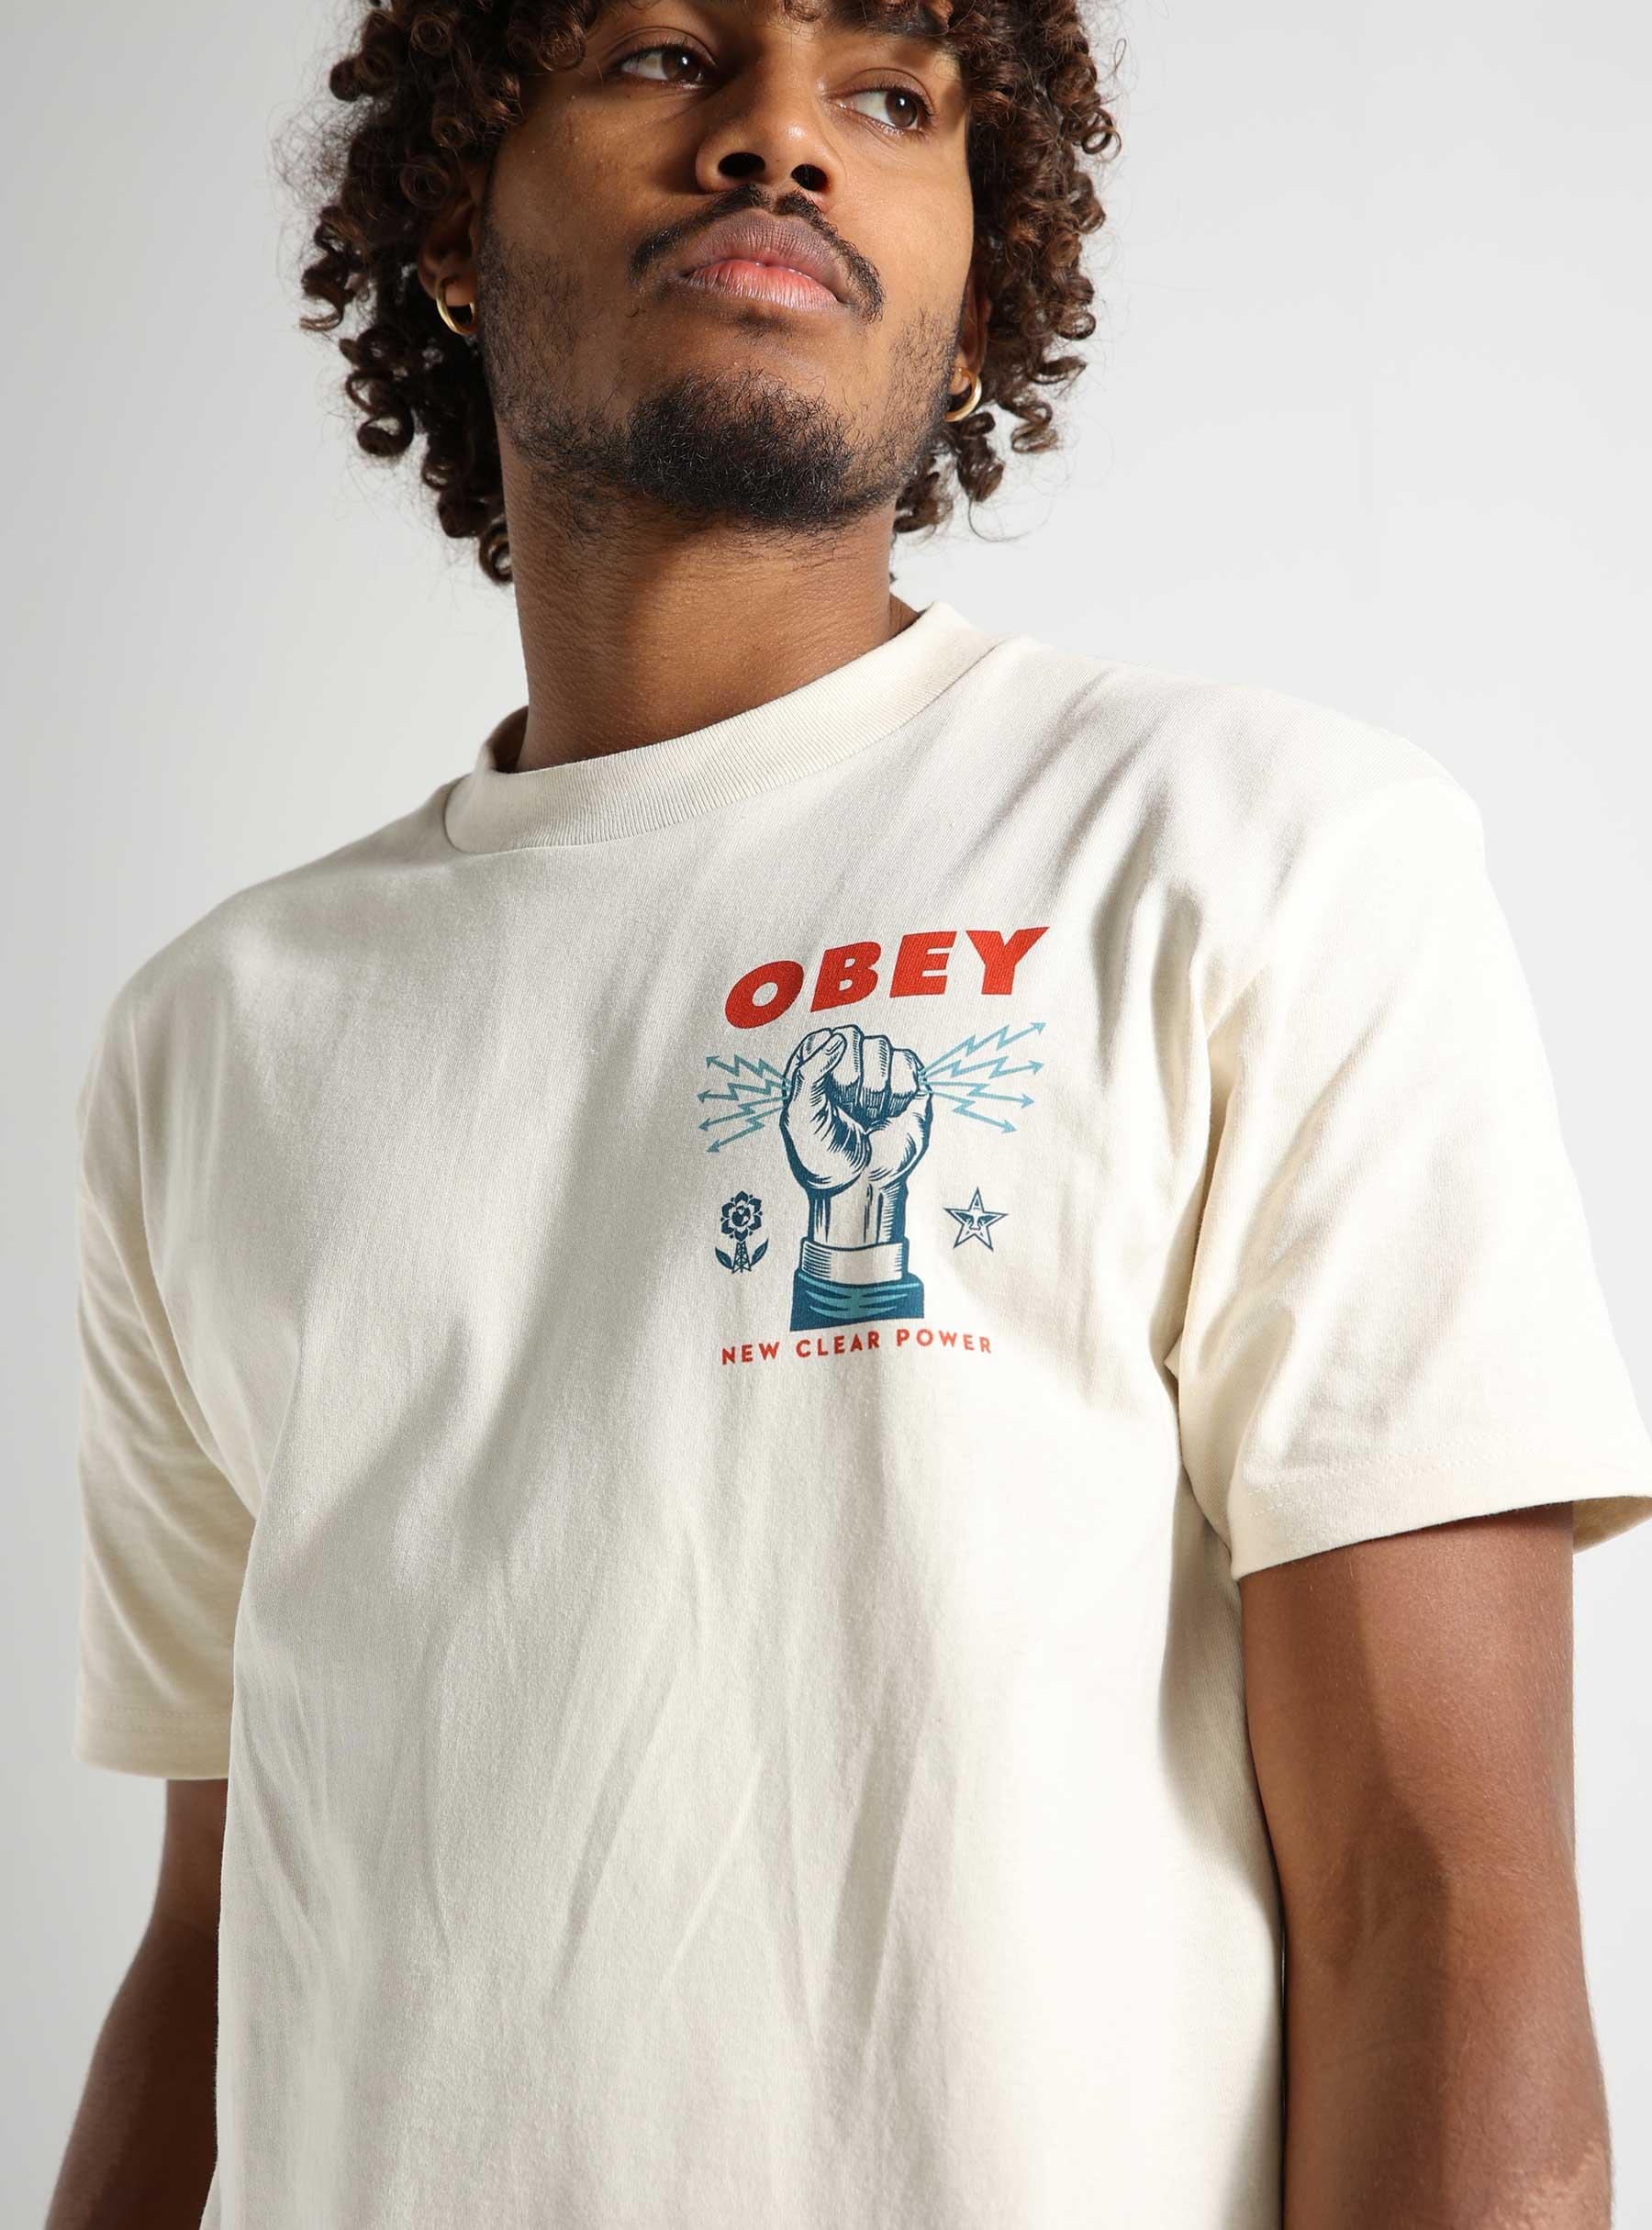 Obey New Clear Power T-shirt Cream 165263779-CRM